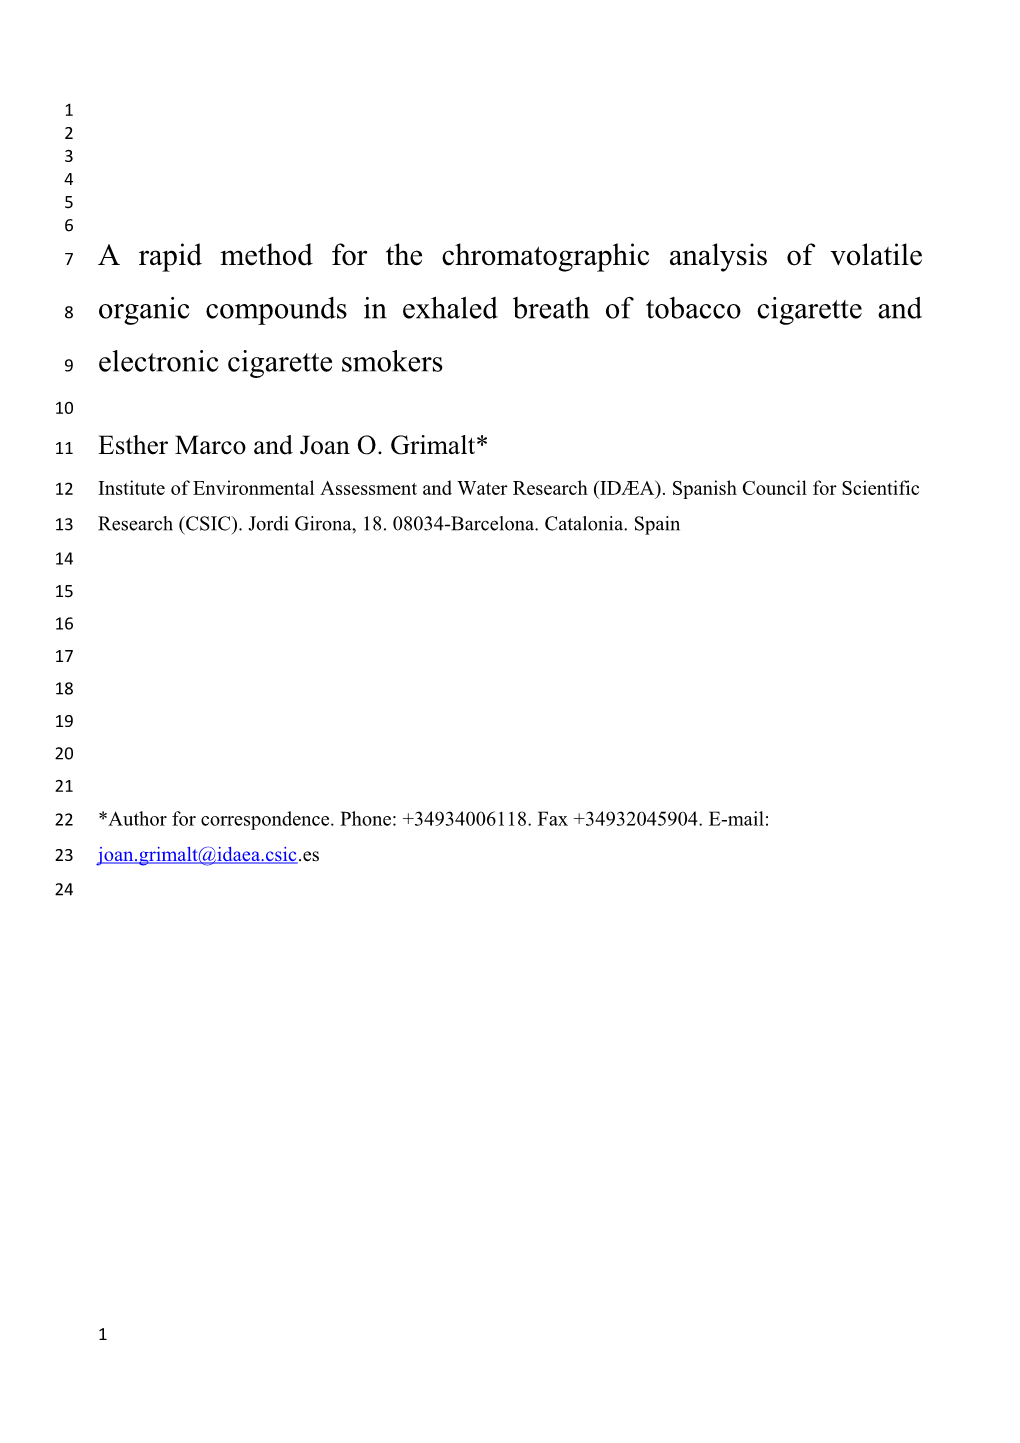 A Rapid Method for the Chromatographic Analysis of Volatile Organic Compounds in Exhaled